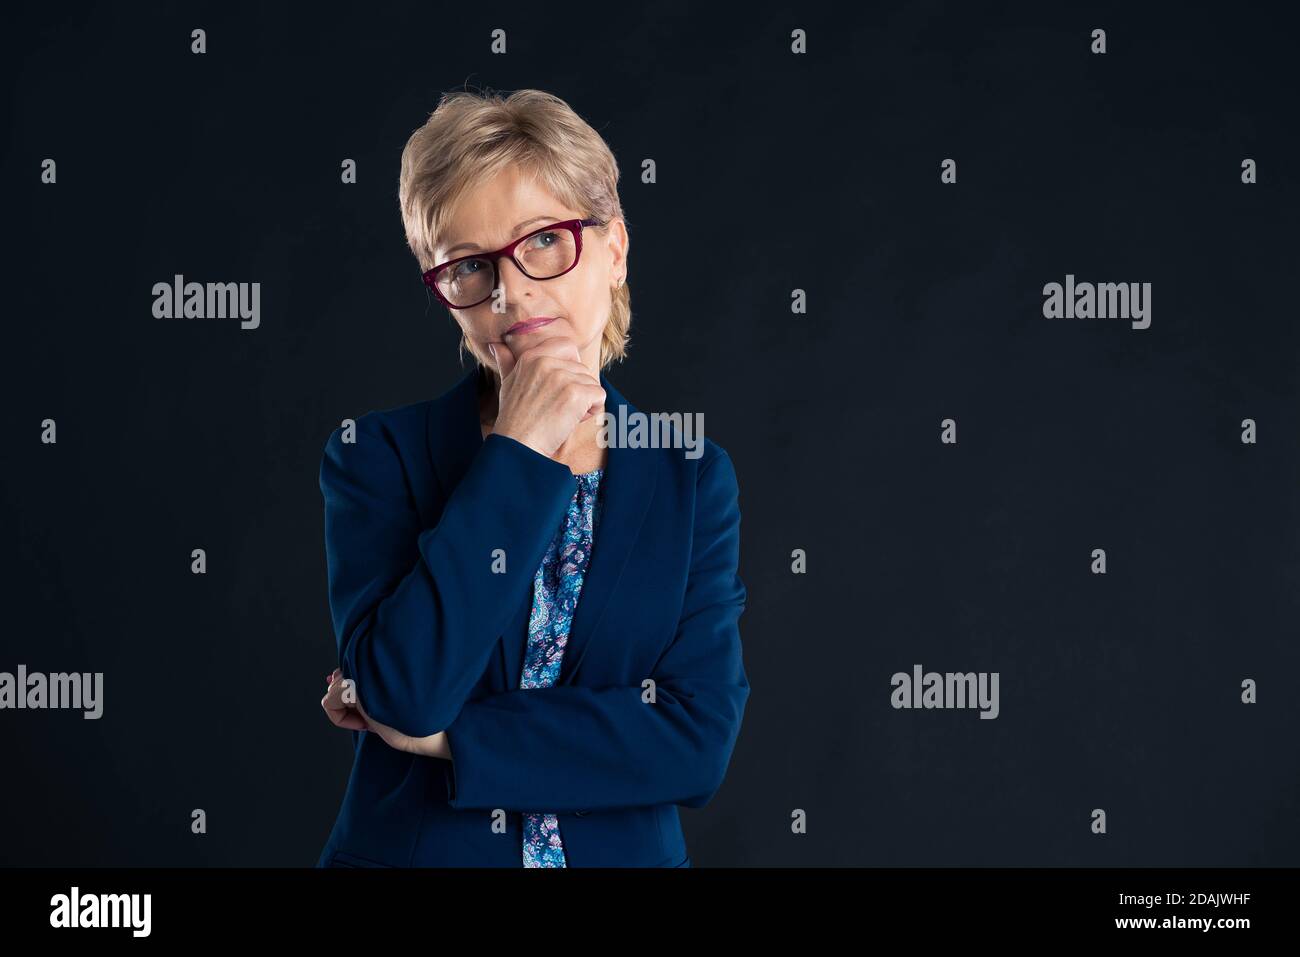 Portrait of an older secretary thinking of something wearing a blue jaket and glasses Stock Photo